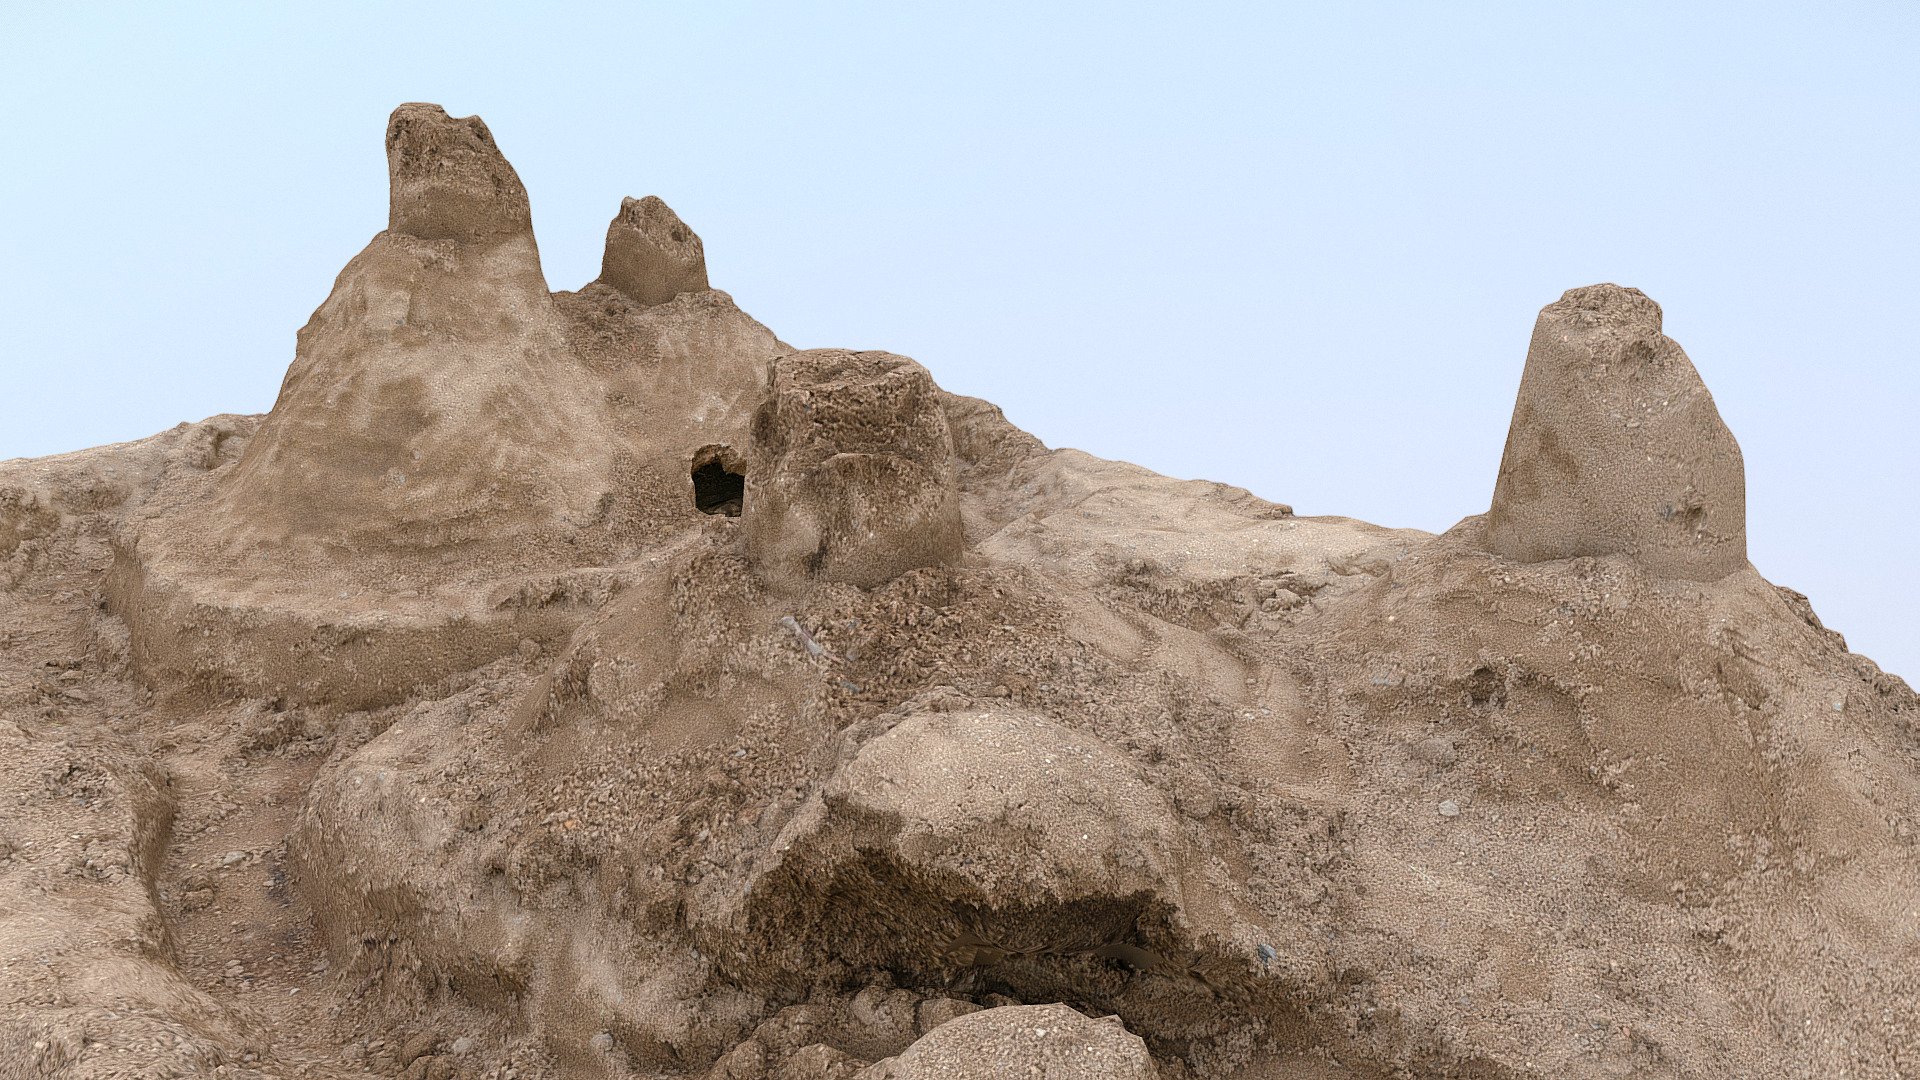 Castle made of sand, imperfect children creation in their playground sandbox, with hand imprints and some footprints, authentic semi-destroyed by other kids

photogrammetry scan (100x24MP), 2x16K texture + HD Normals - Sand castle - Buy Royalty Free 3D model by matousekfoto 3d model